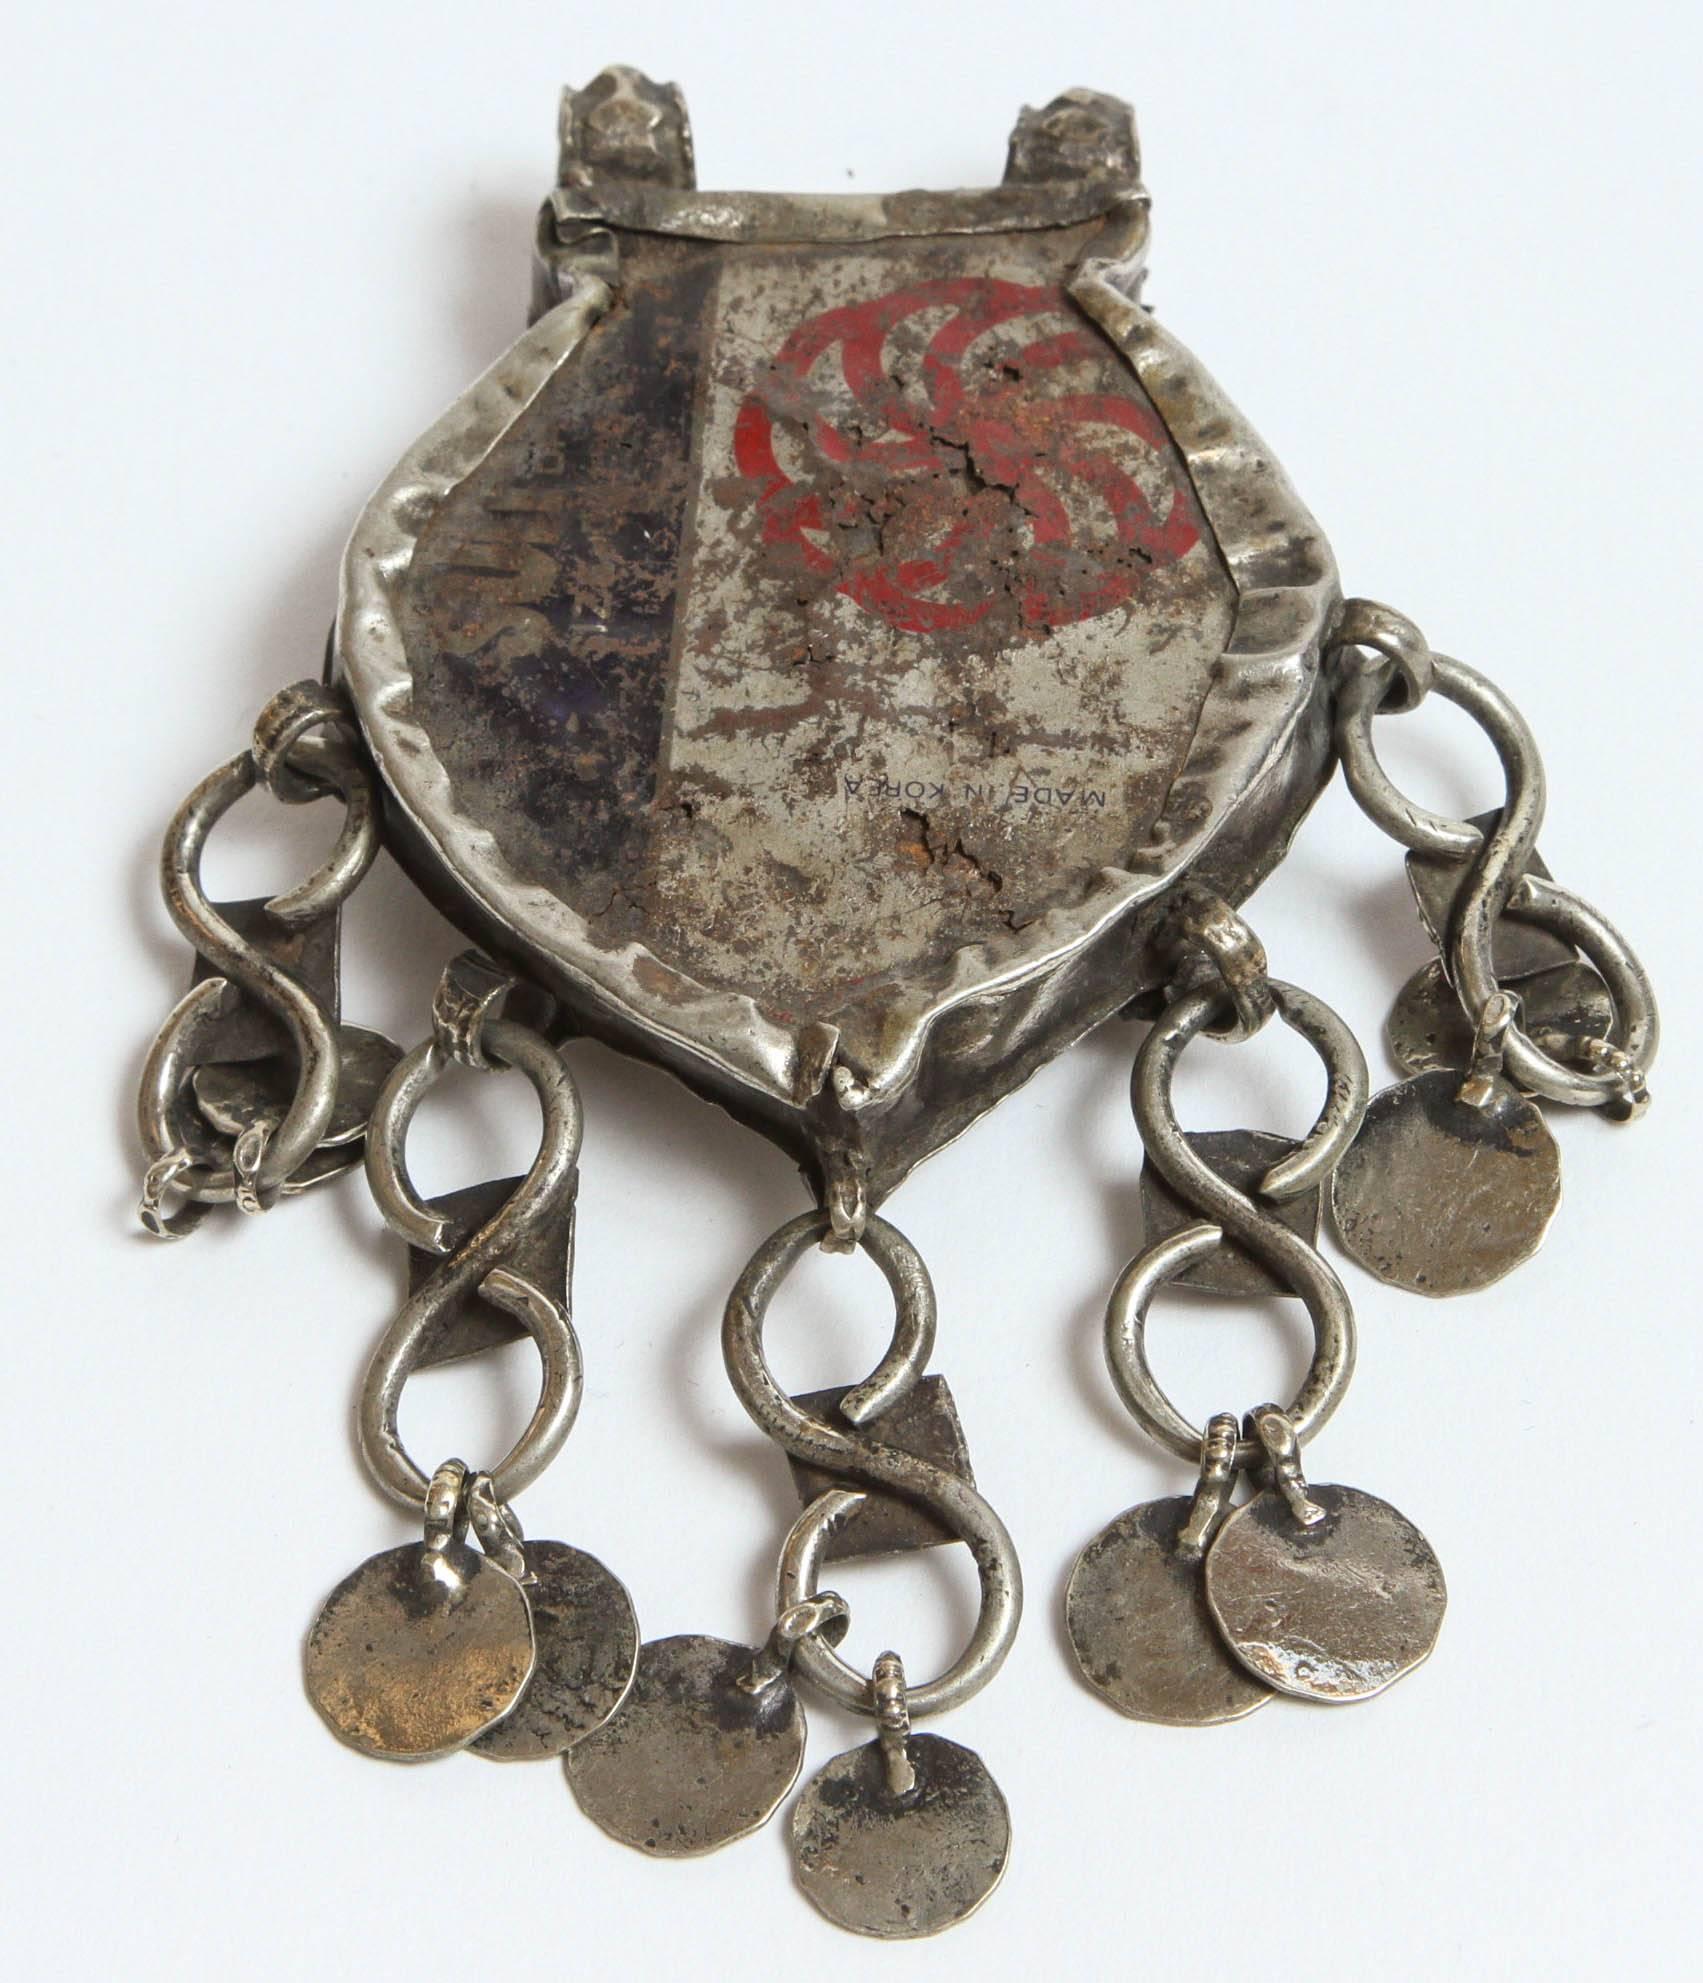 Vintage Moroccan Silver Fibula Collectible Ethnic Jewelry Talisman In Good Condition For Sale In North Hollywood, CA